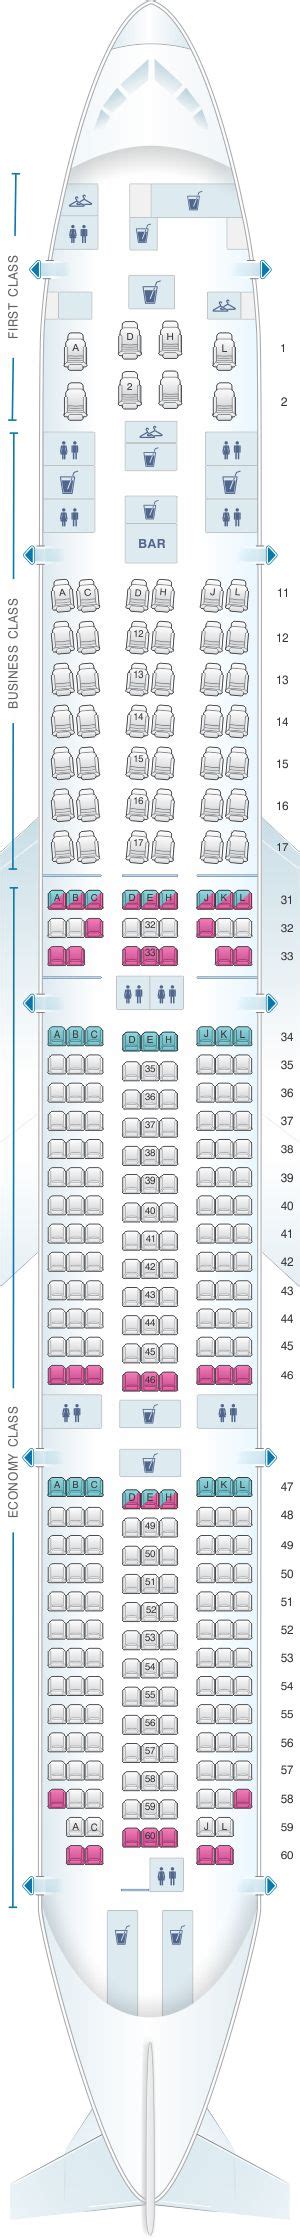 Seat Map Air China Boeing B777 300er Asiana Airlines Air Transat